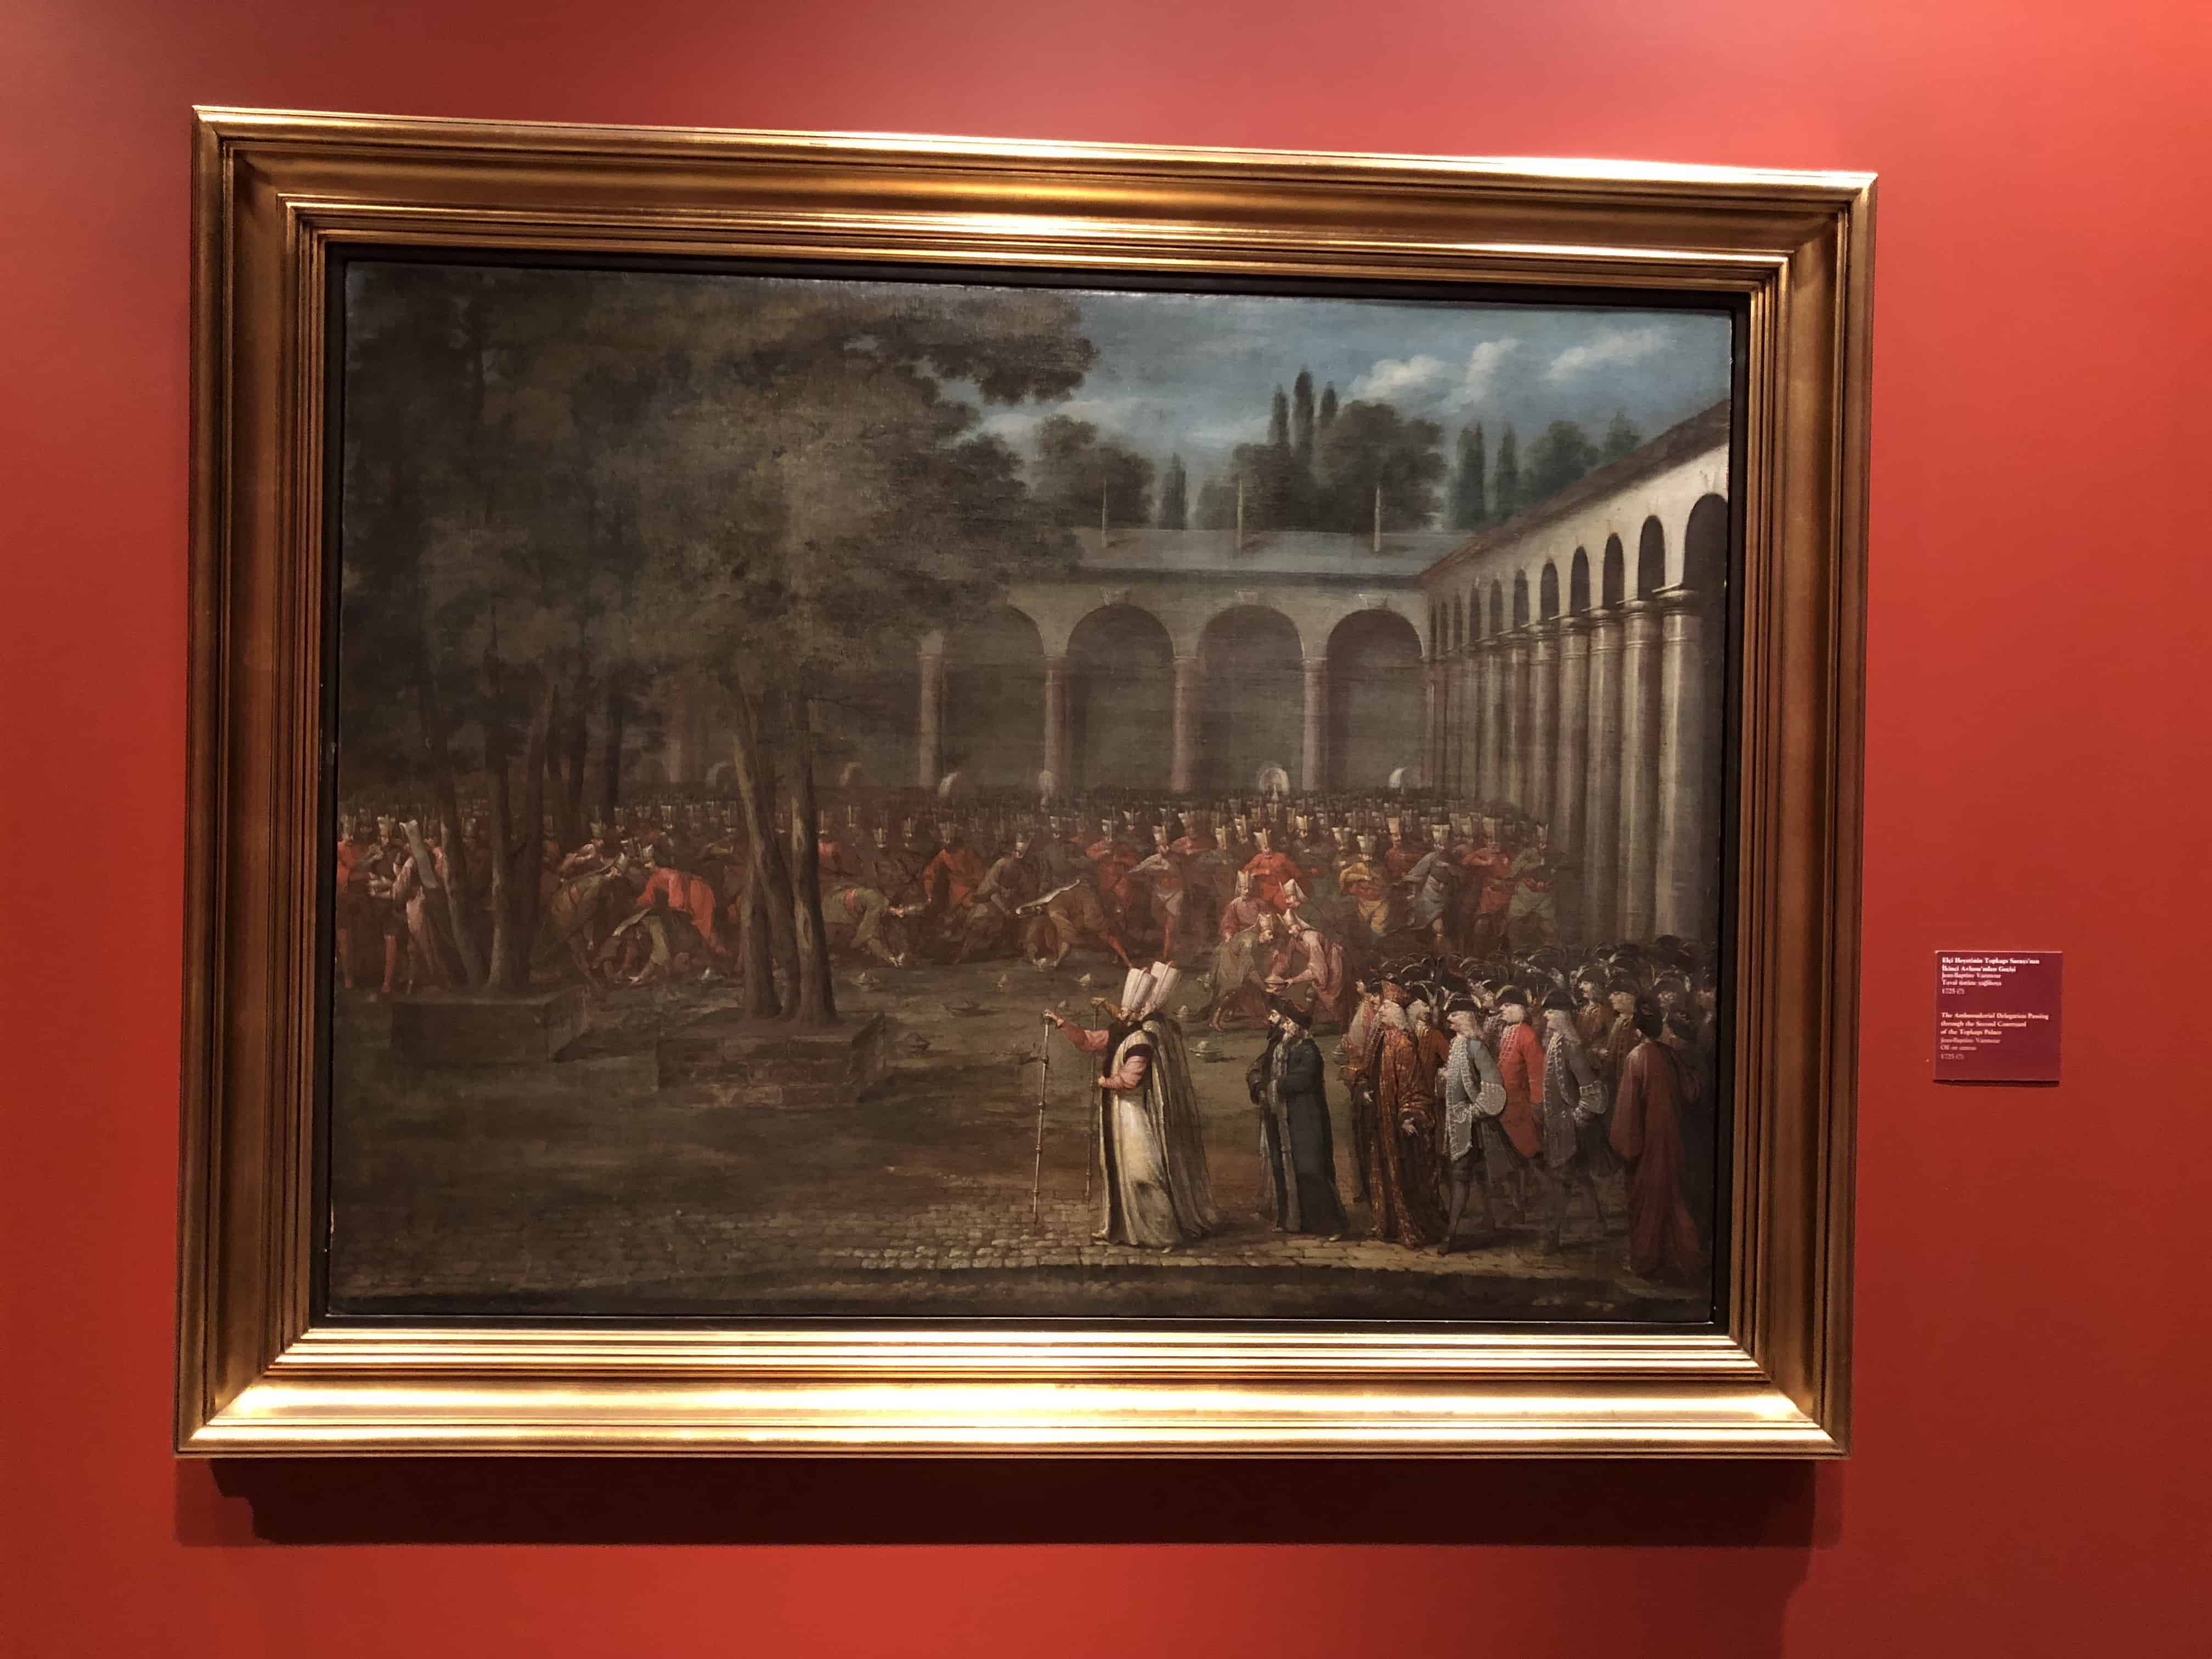 The Ambassadorial Delegation Parading through the Second Courtyard at the Topkapı Palace, Jean-Baptiste van Mour (1725?)